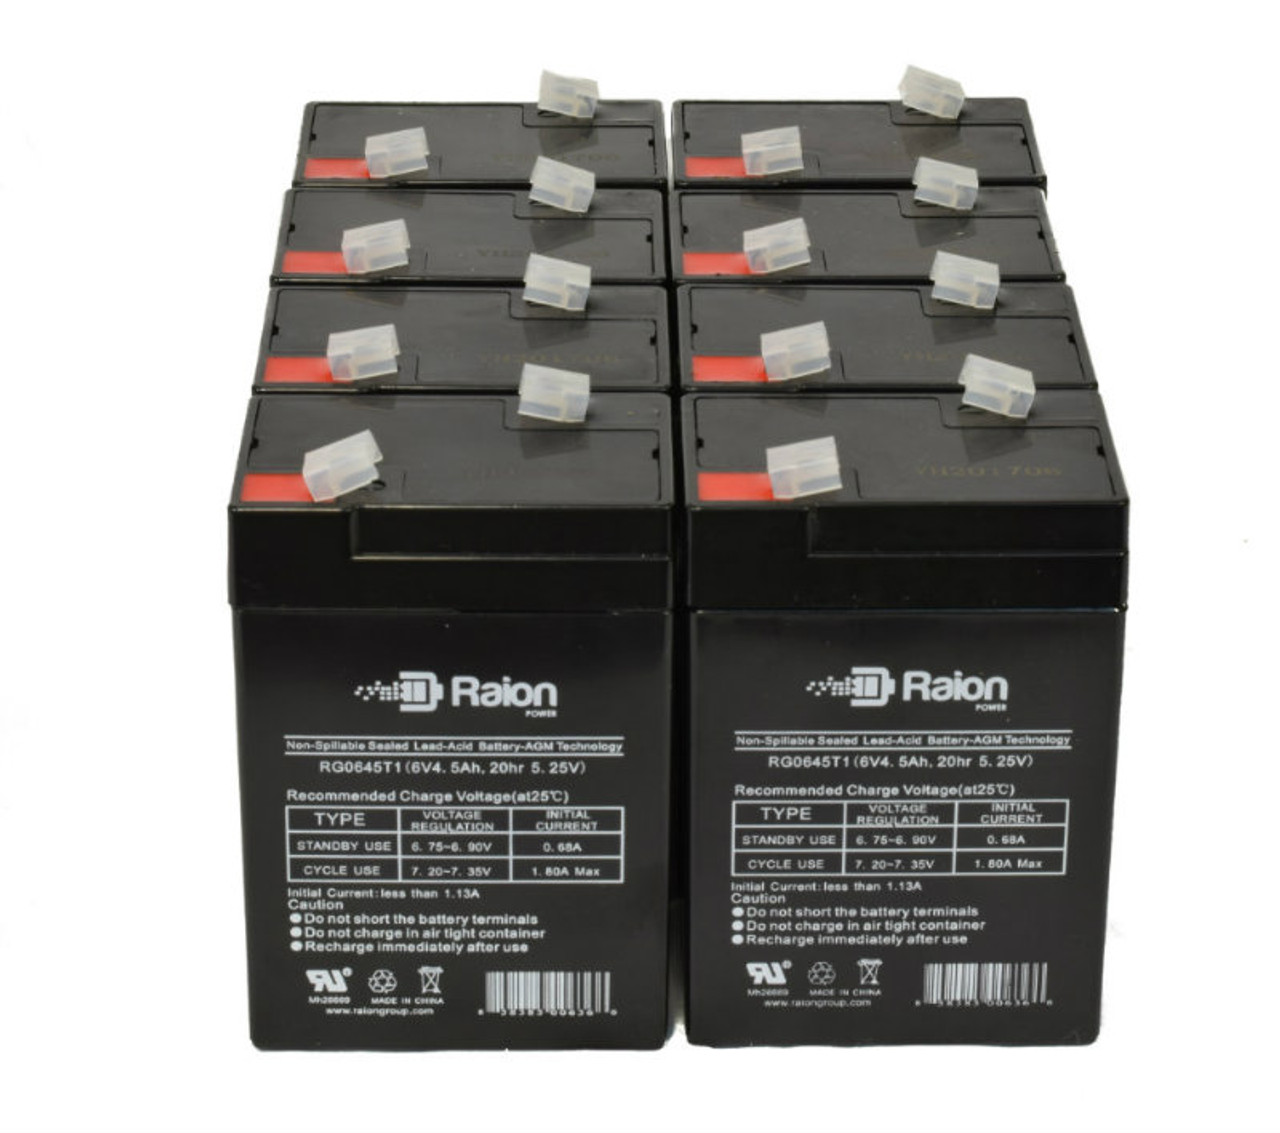 Raion Power 6V 4.5Ah Replacement Emergency Light Battery for Dyna-Ray B6V4 - 8 Pack